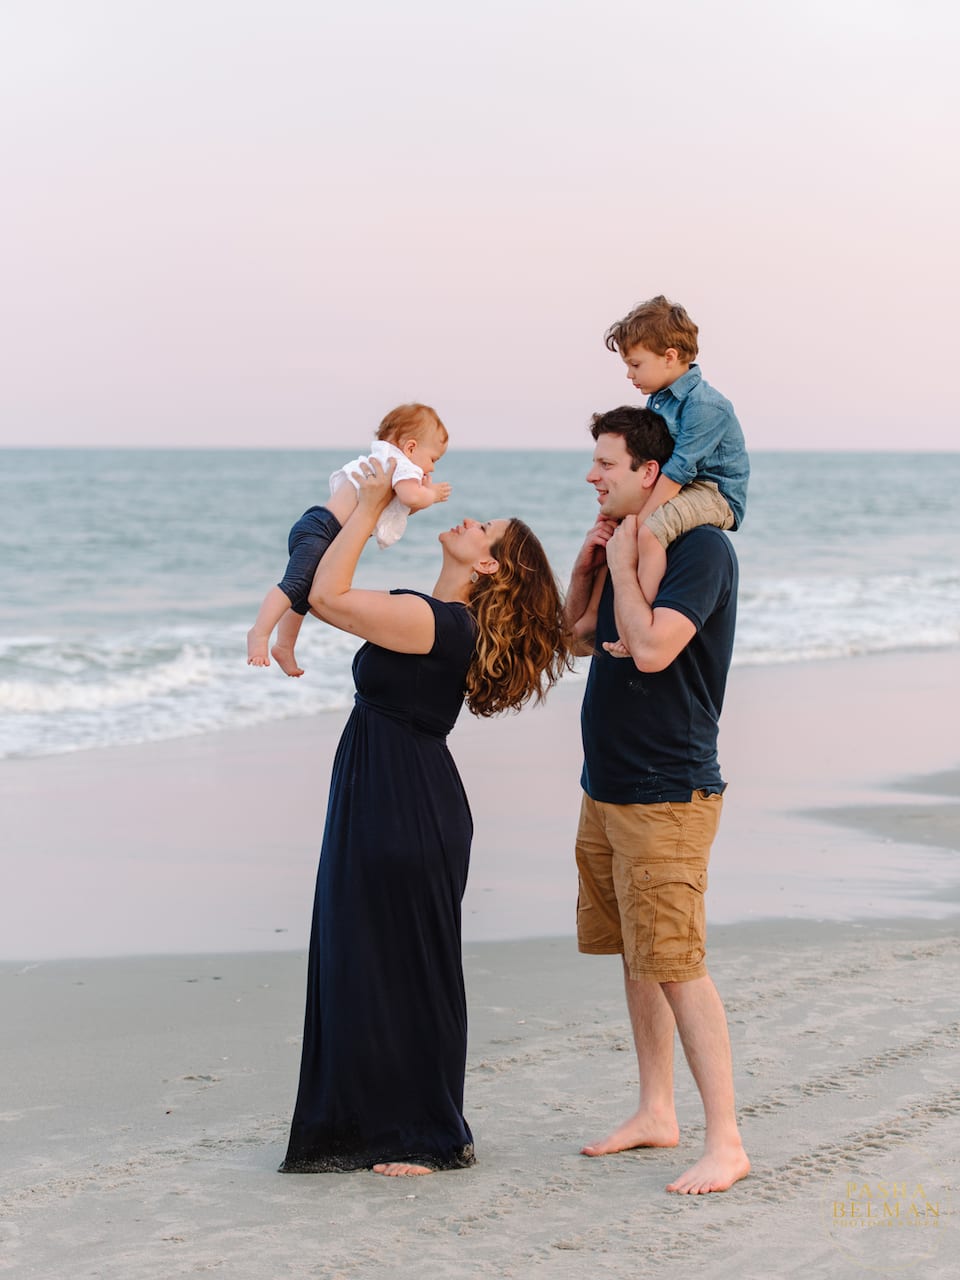 Myrtle Beach State Park Family Session by Pasha Belman. Top Photographers in Myrtle Beach for Families.